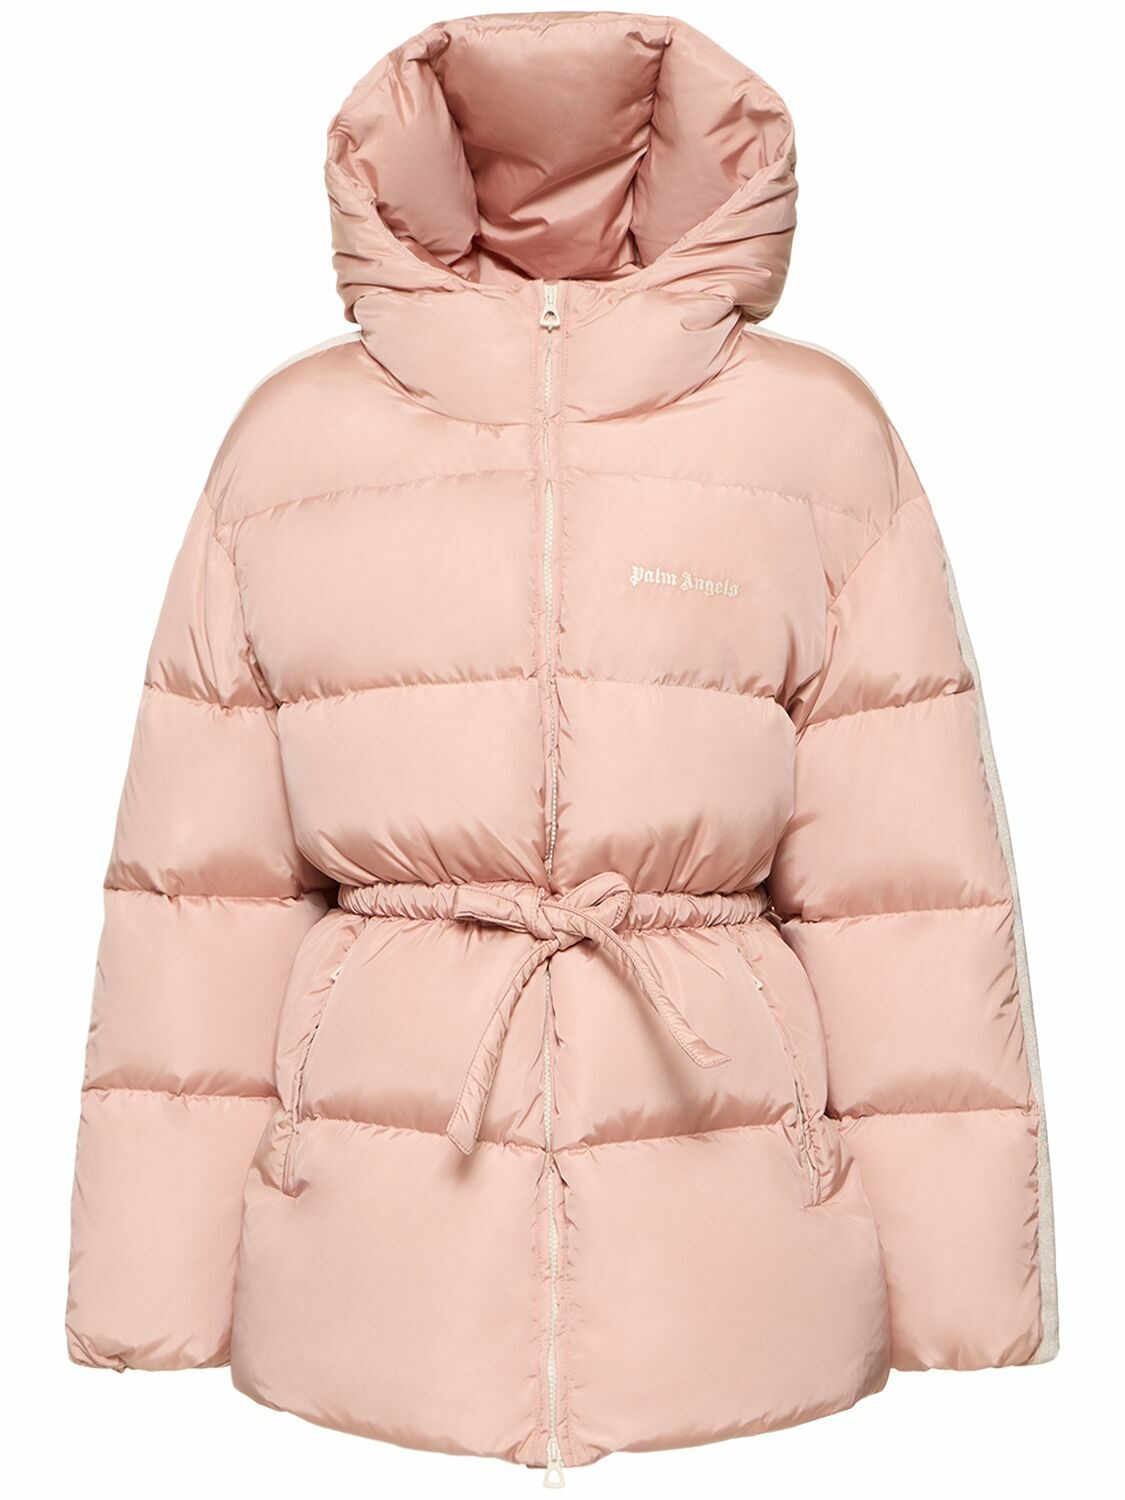 Photo: PALM ANGELS - Belted Nylon Down Jacket